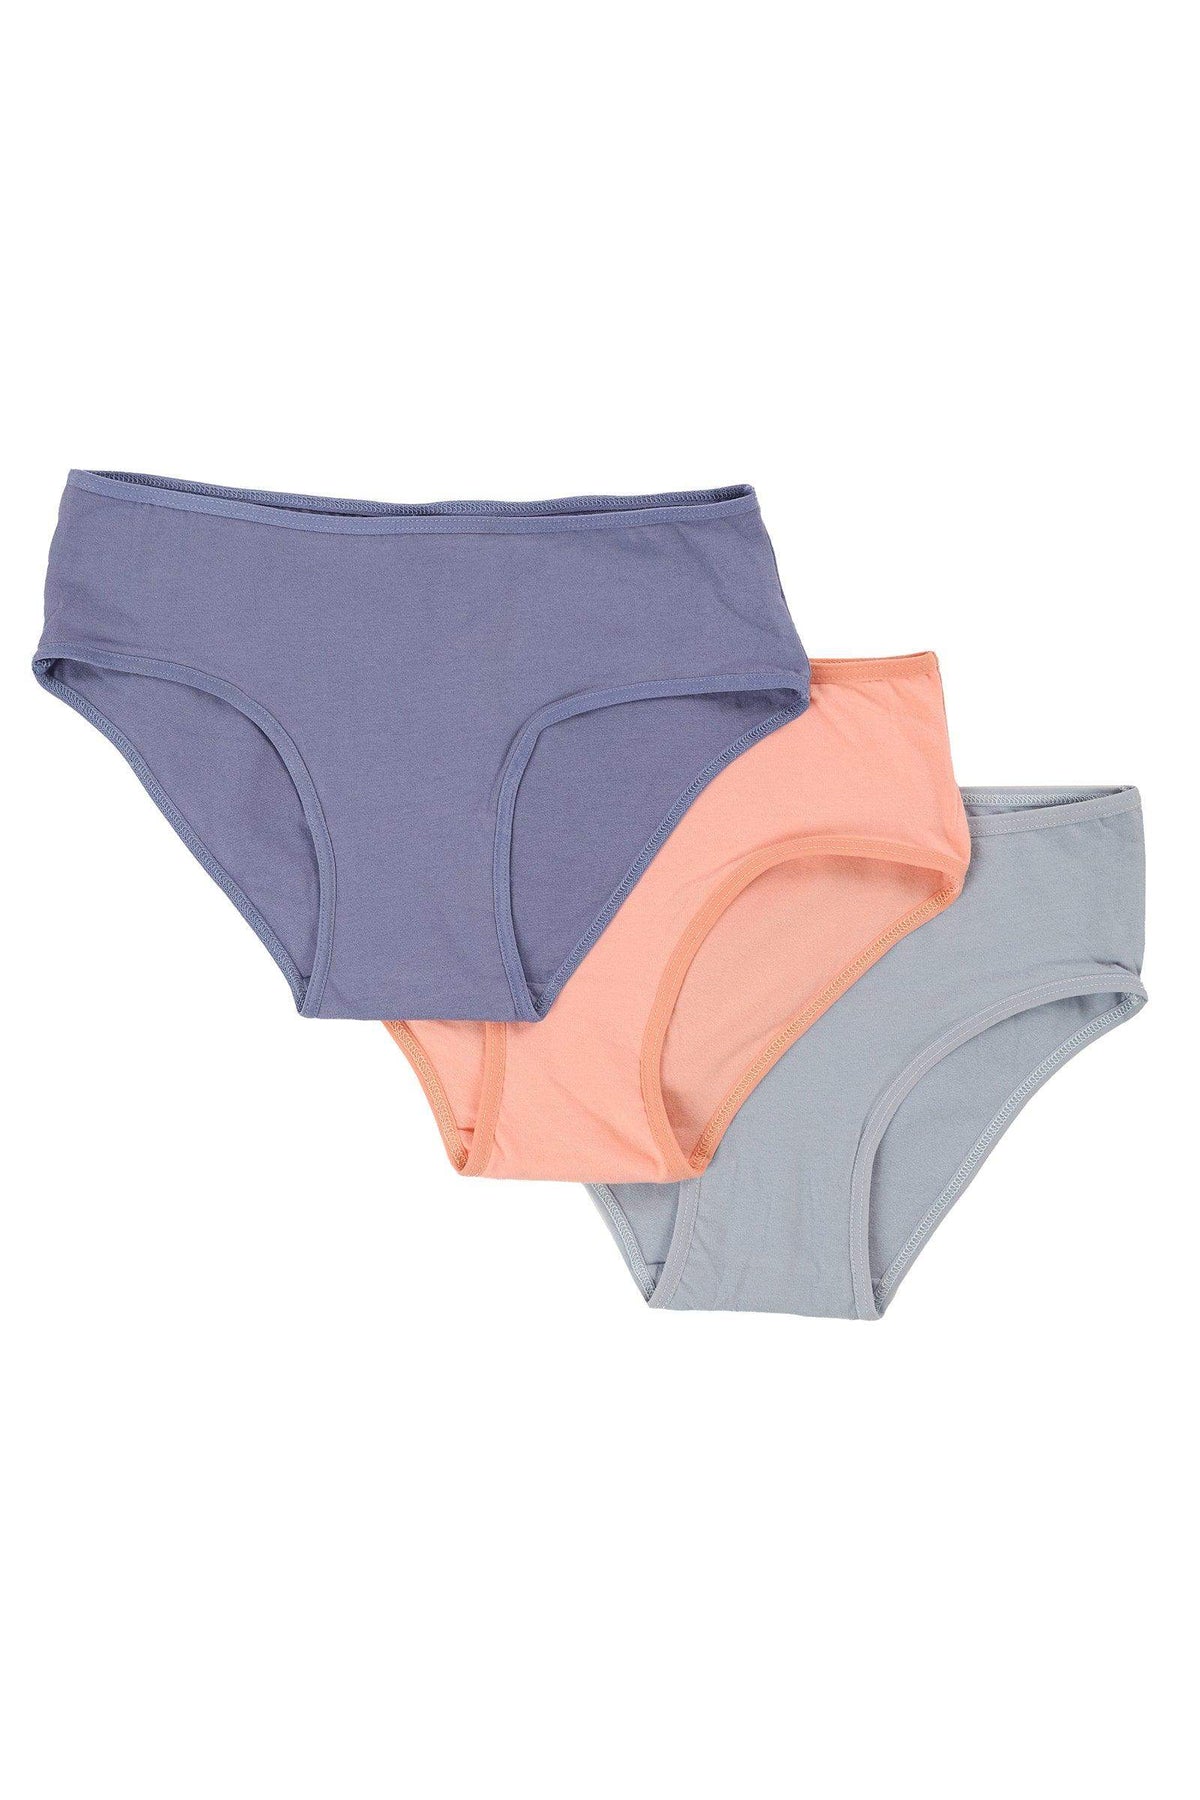 Pack of 3 Colored Brief Panties - Carina - كارينا